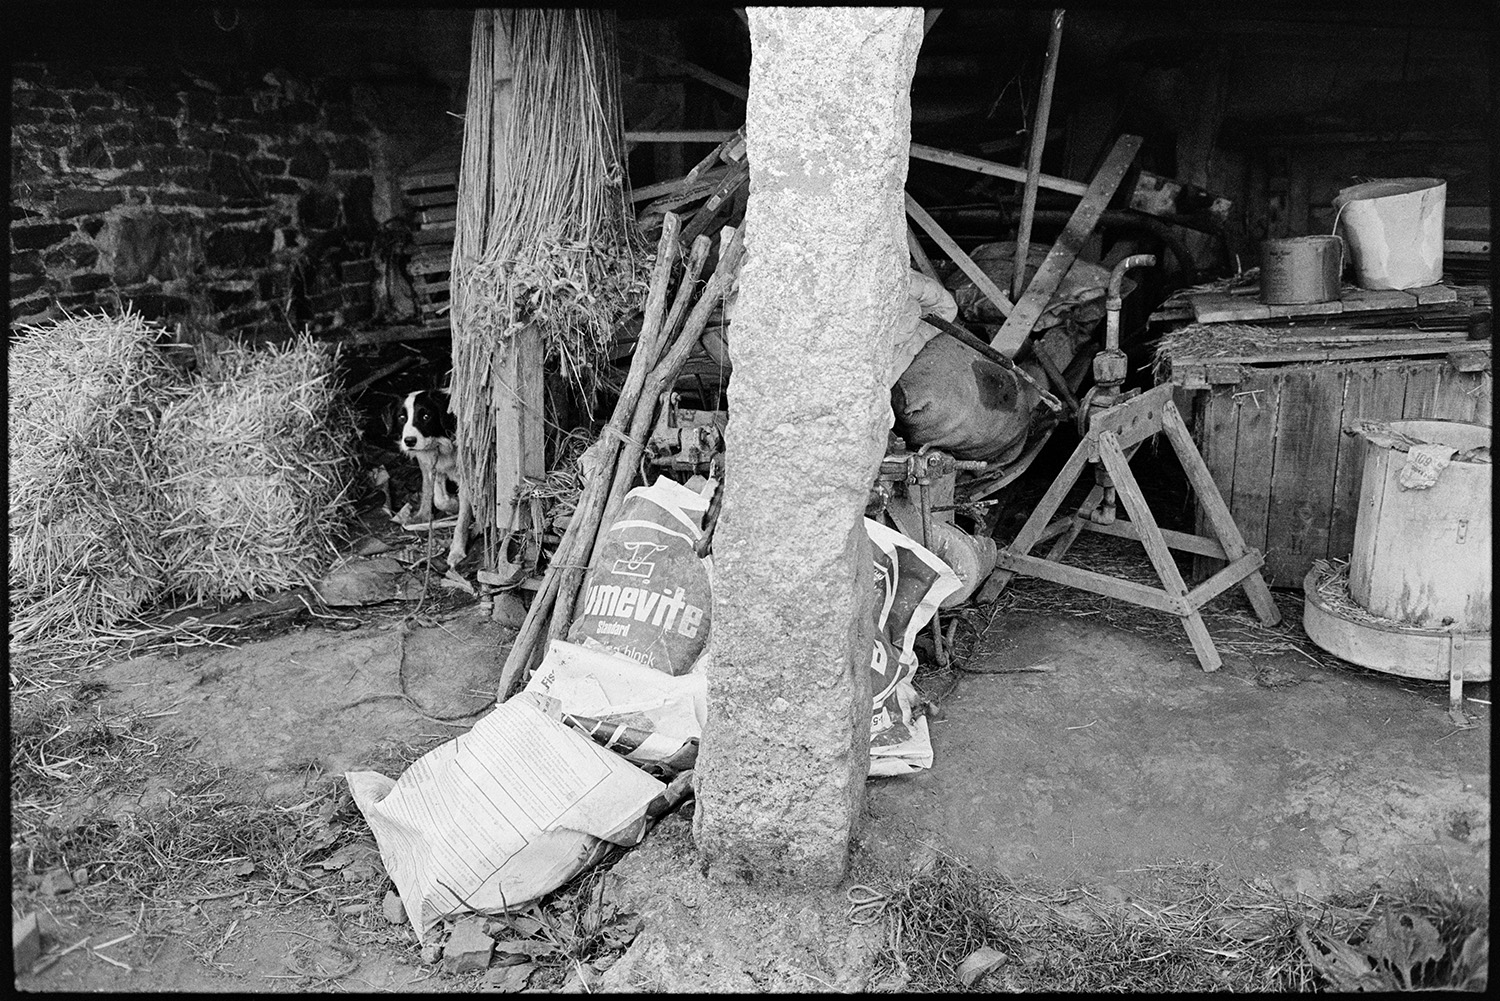 Stone pillar of barn with tethered dog and farm machinery. 
[A dog tethered in an open barn with straw bales, farm machinery and bags, at Lower Langham, Dolton. A stone pillar of the barn can be seen in the foreground.]